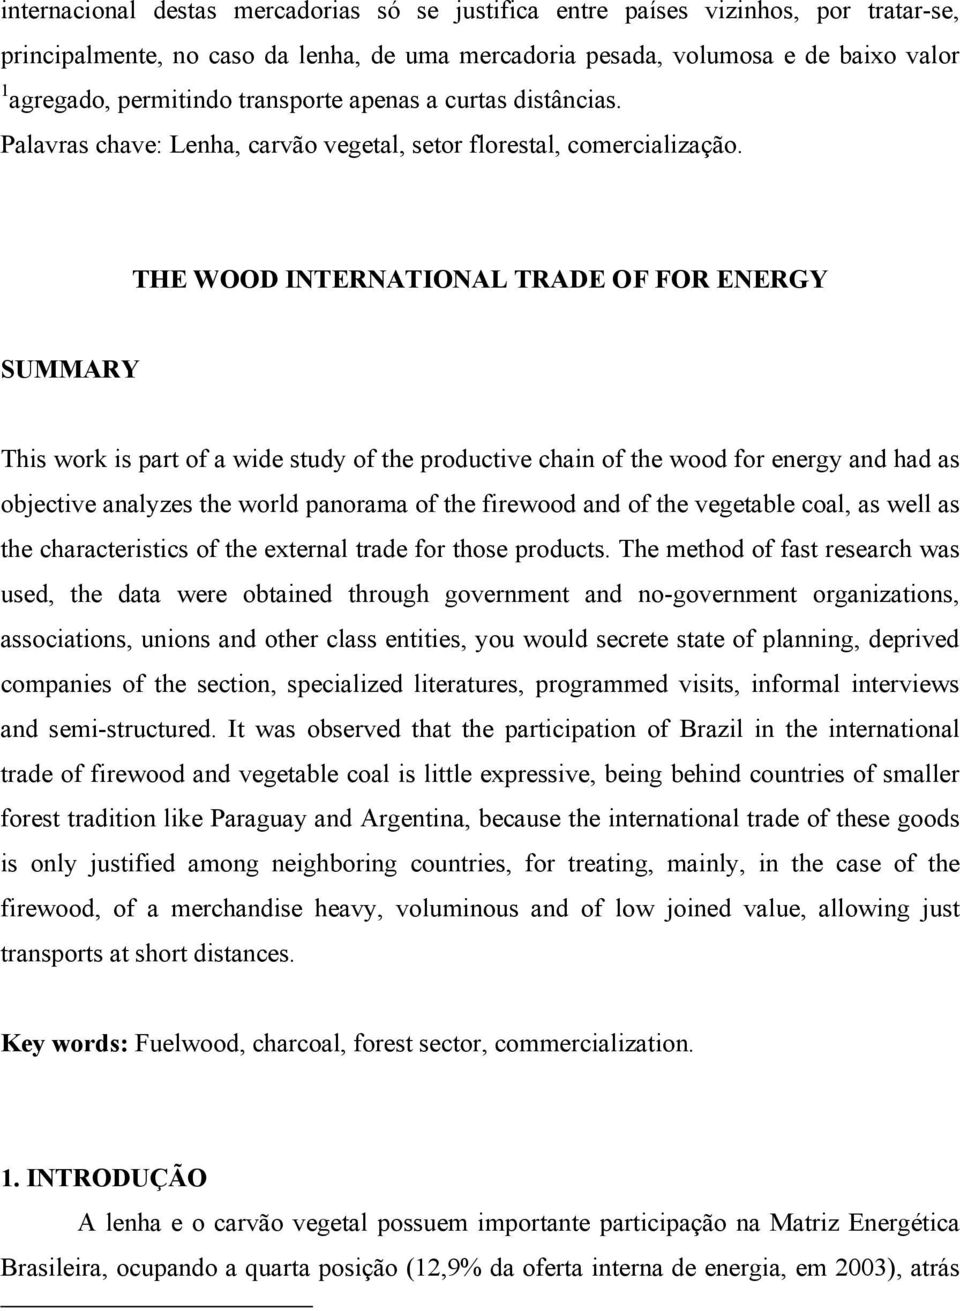 THE WOOD INTERNATIONAL TRADE OF FOR ENERGY SUMMARY This work is part of a wide study of the productive chain of the wood for energy and had as objective analyzes the world panorama of the firewood